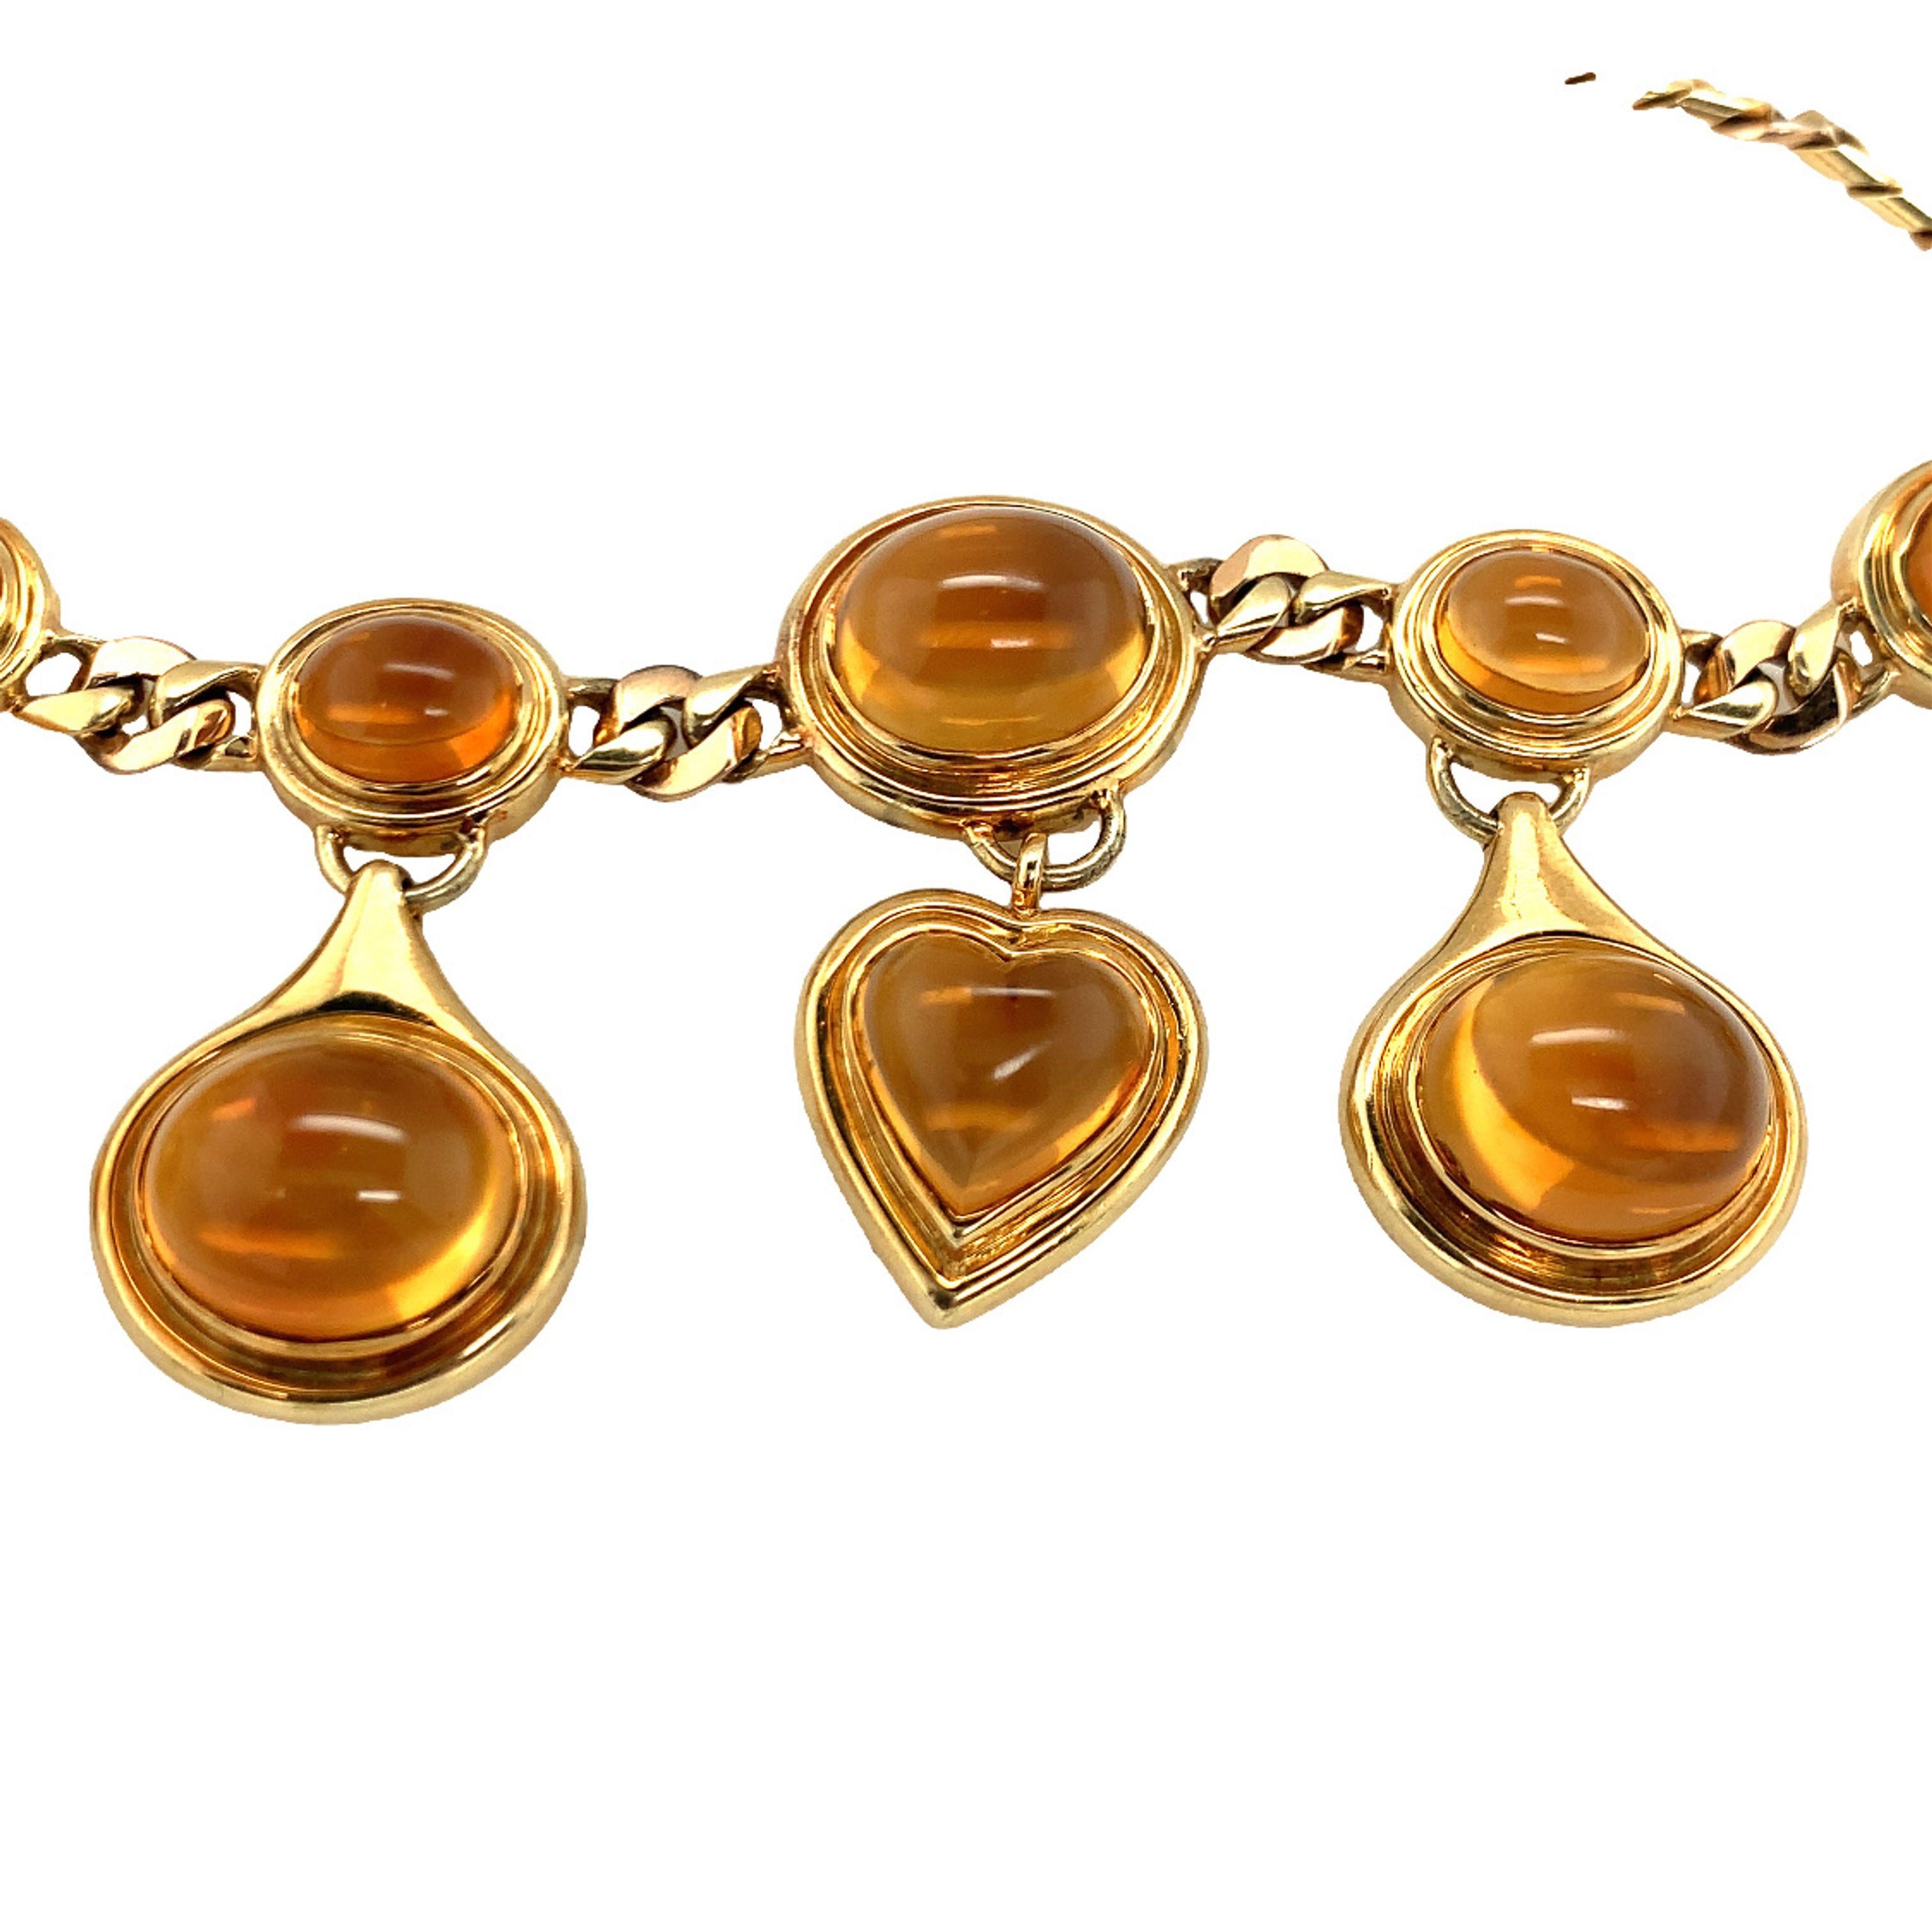 One citrine 18K yellow gold necklace composed of ten bezel set, oval and heart cabochon cut suspended citrines totaling 120 ct. upon a bi-color gold curb link chain necklace. Italian hallmarks.

Extravagant, regal, bold.

Metal: 18K yellow